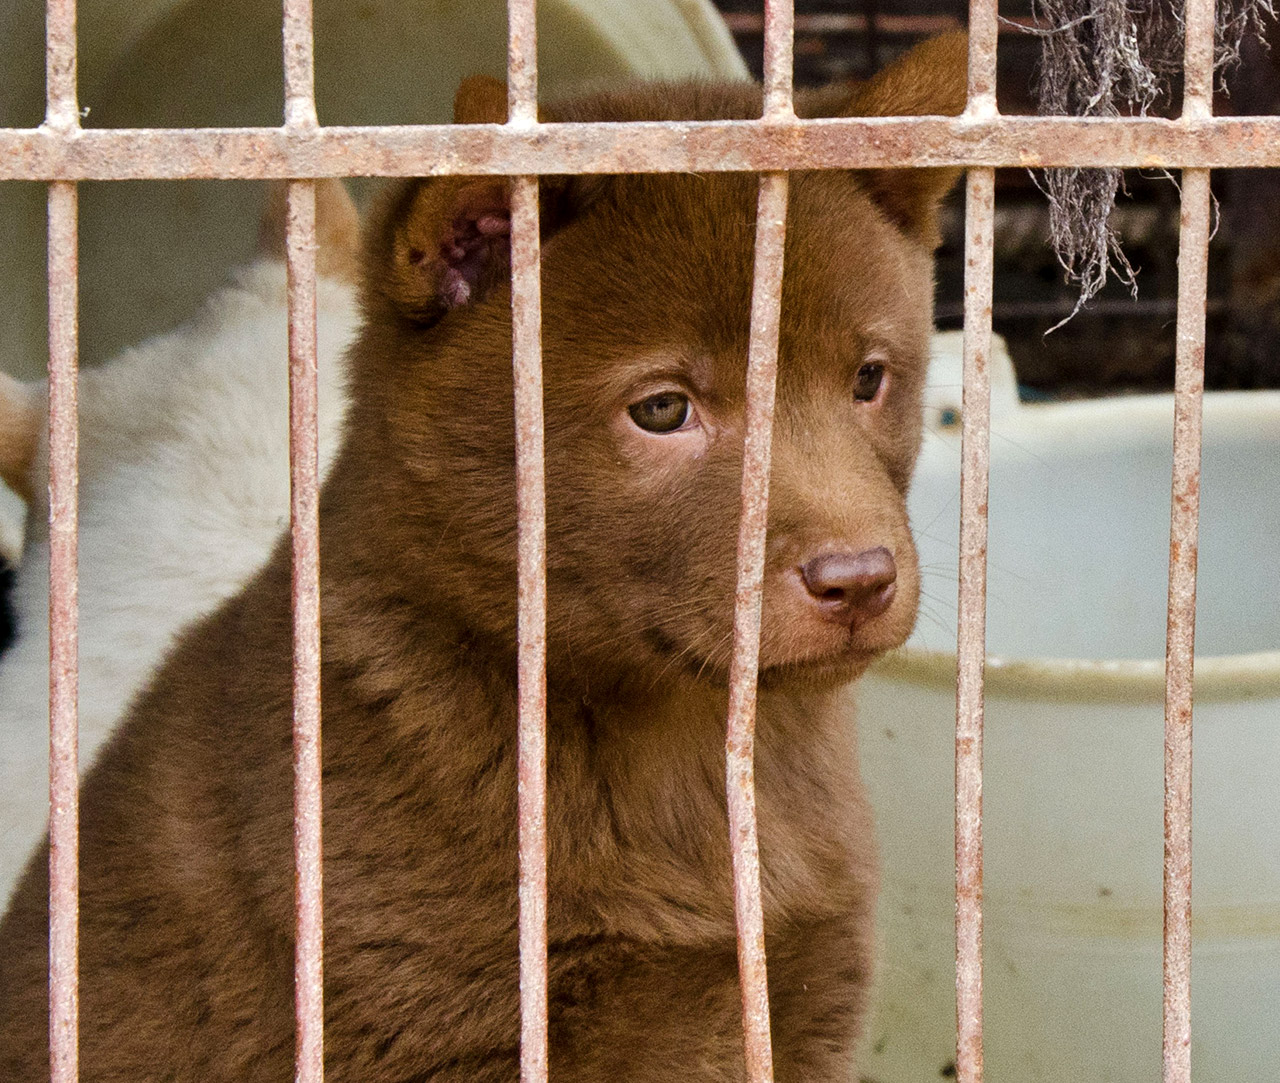 Sad dog in a cage at a dog slaughterhouse